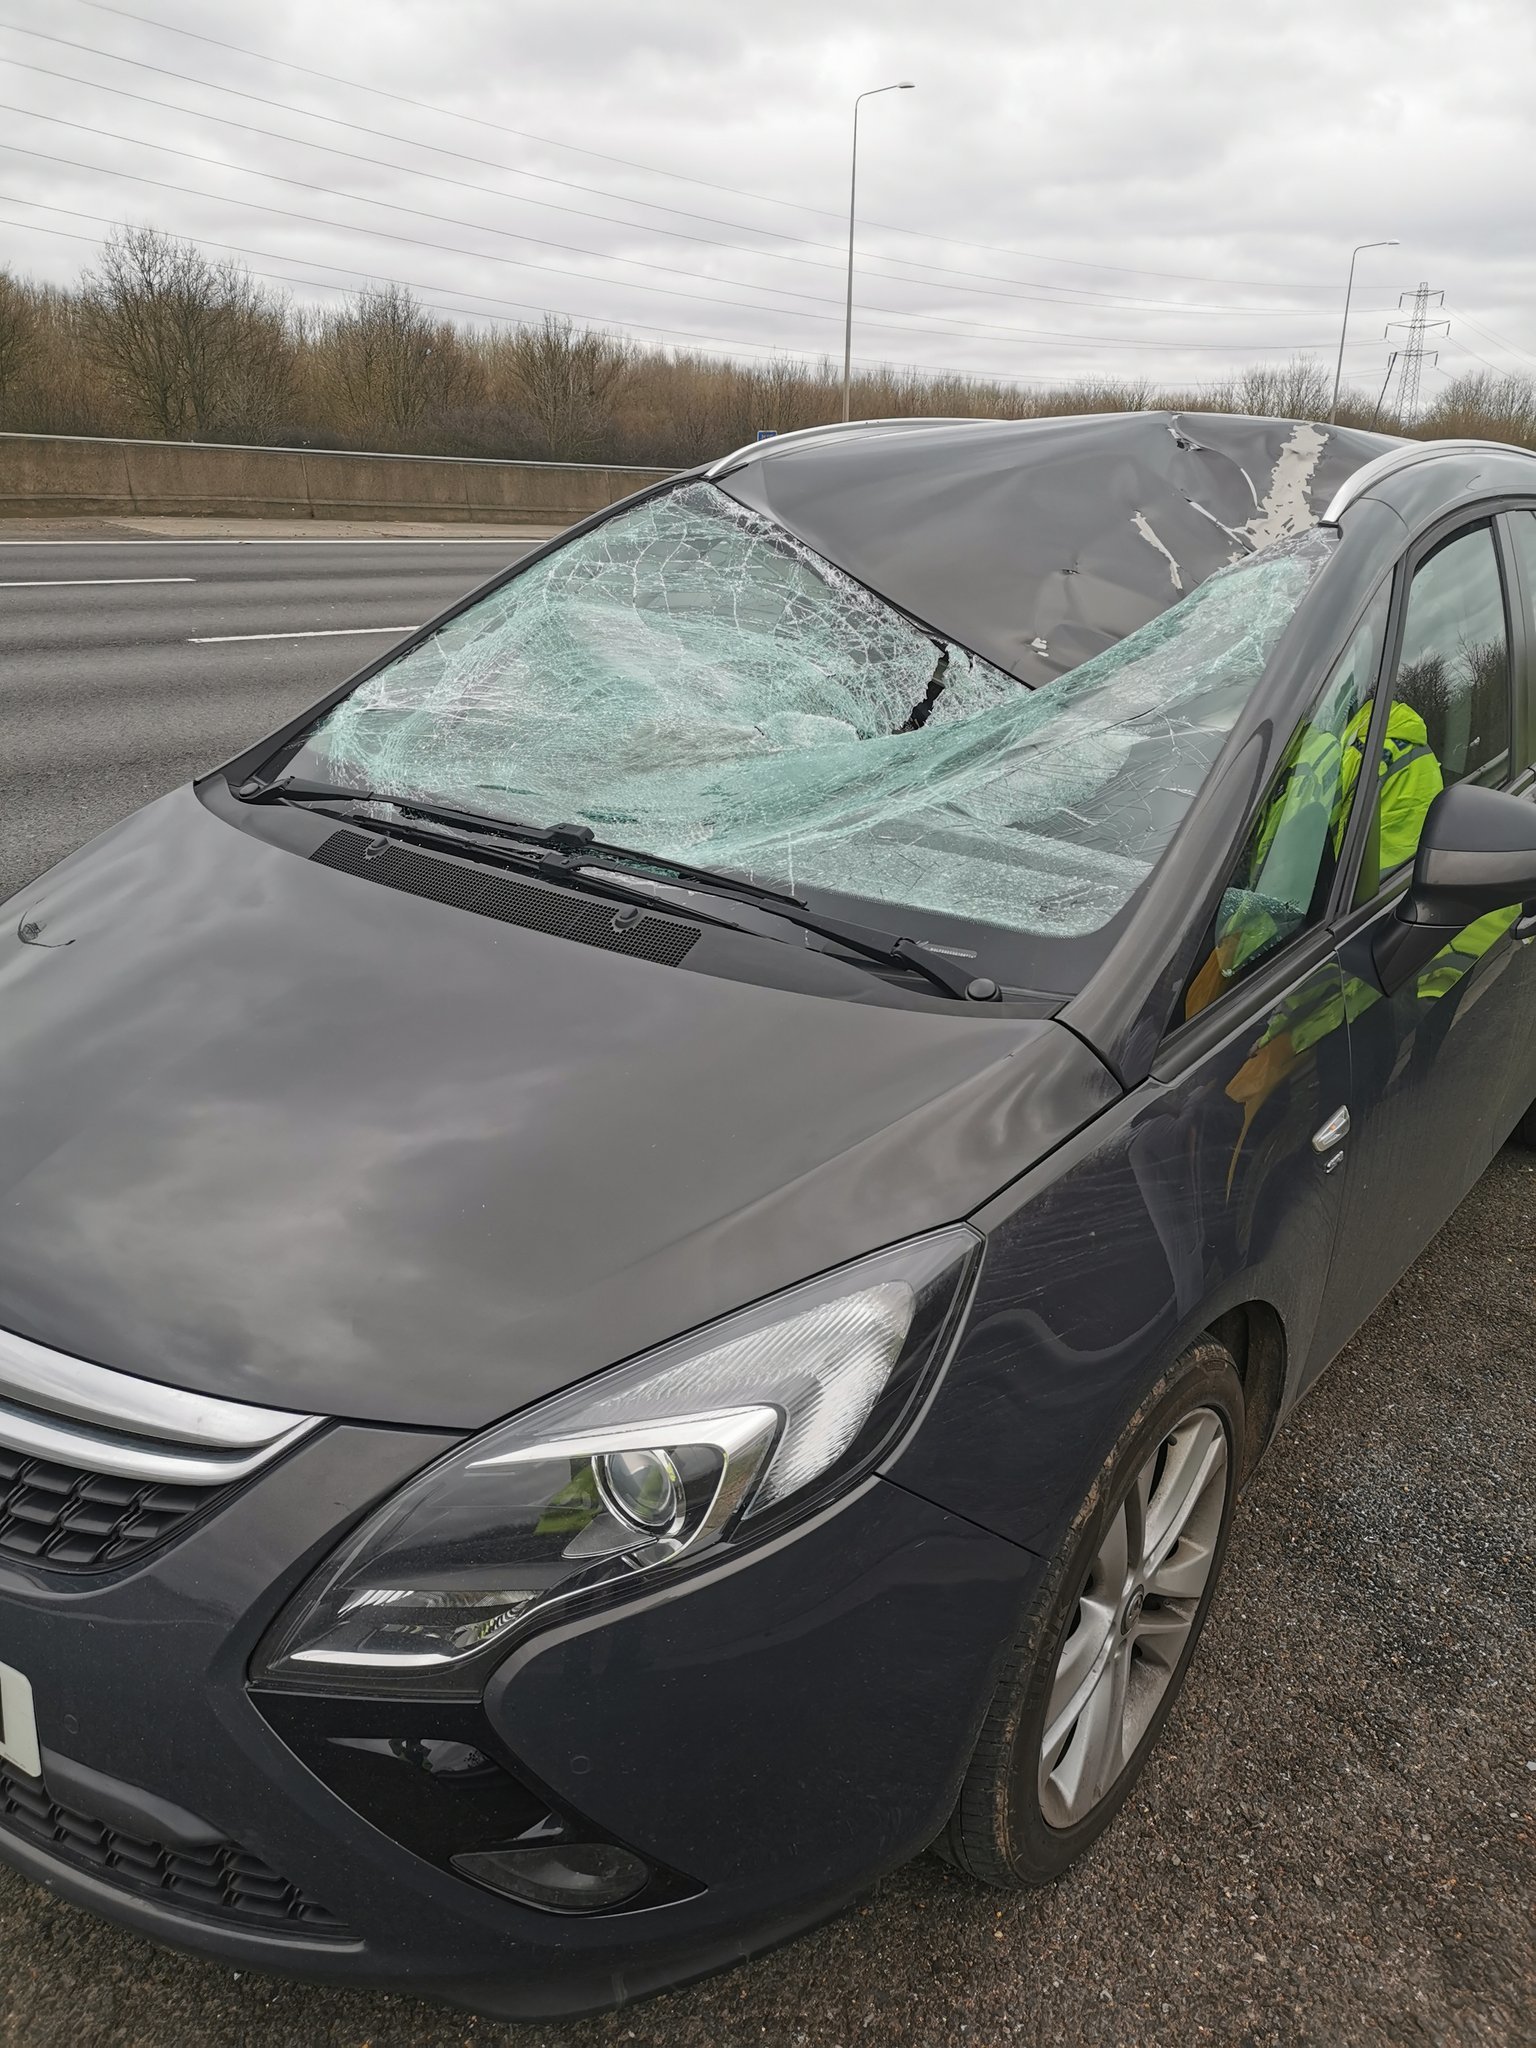 This Vauxhall Zafira was struck by a tyre which fell off a box van travelling in the other direction on the M25. Credit: BCH Road Policing Unit